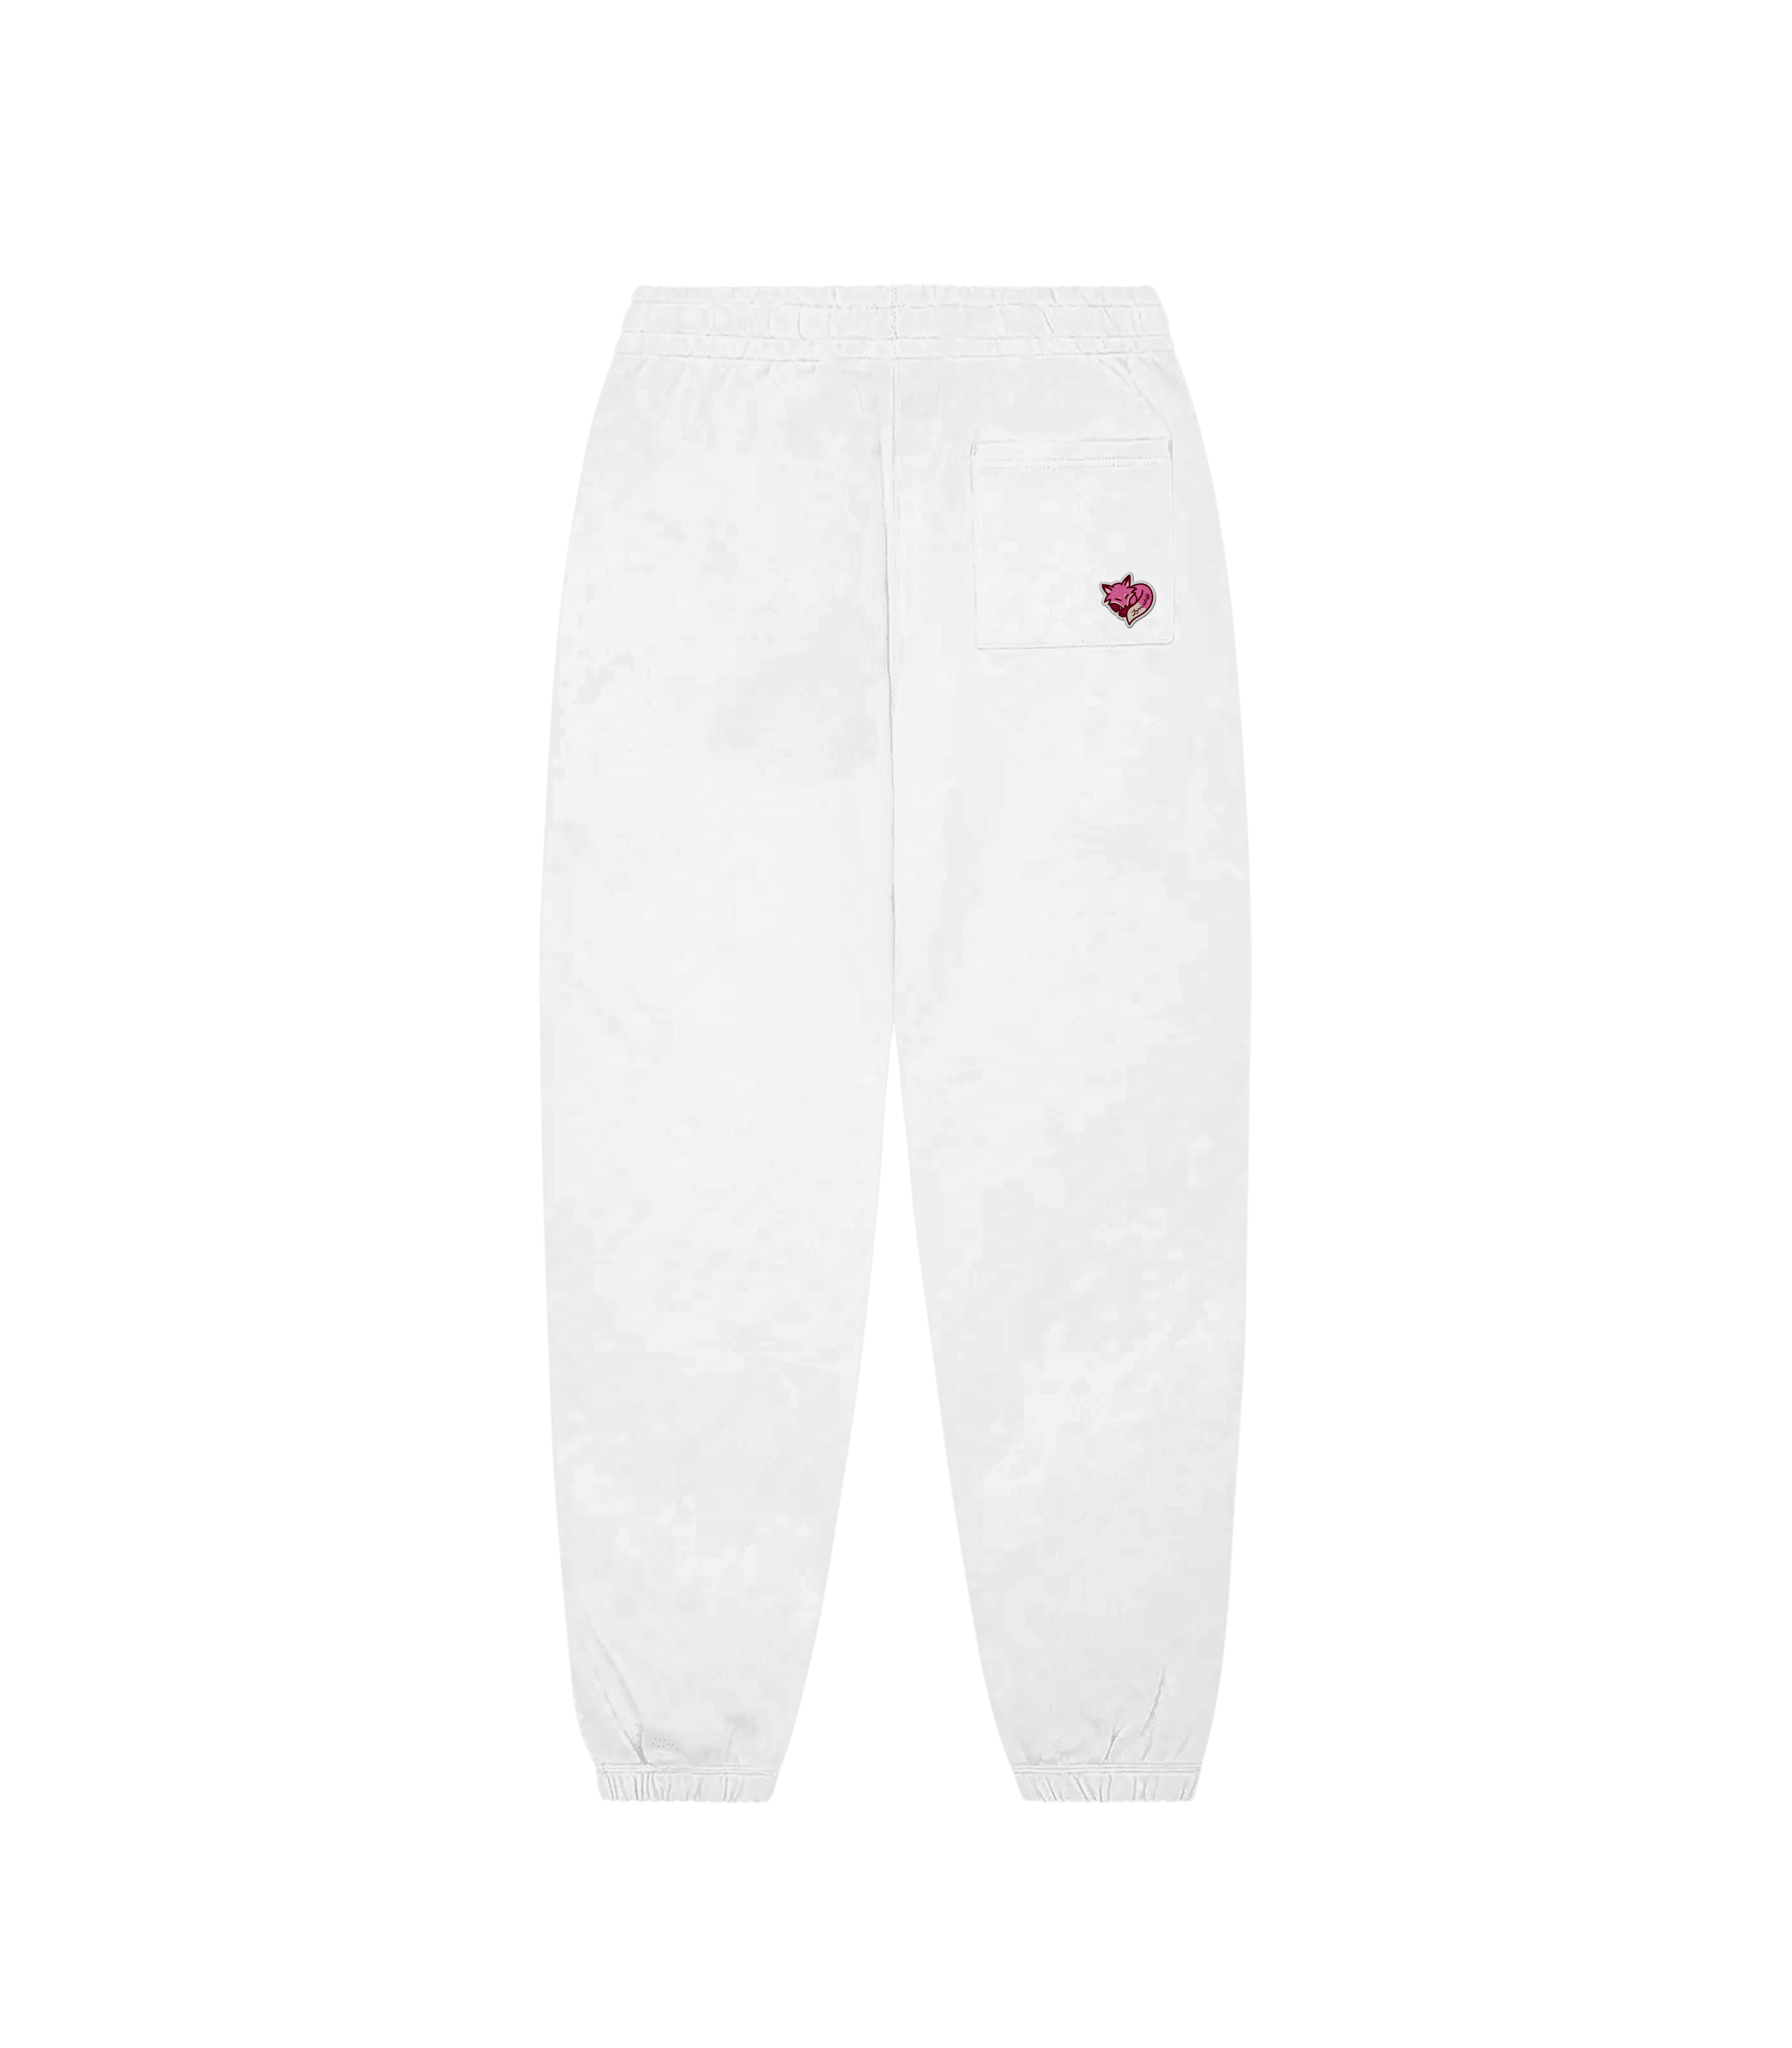 Zorro Stuff Joggers Fall in Love with your Dreams Jogger White